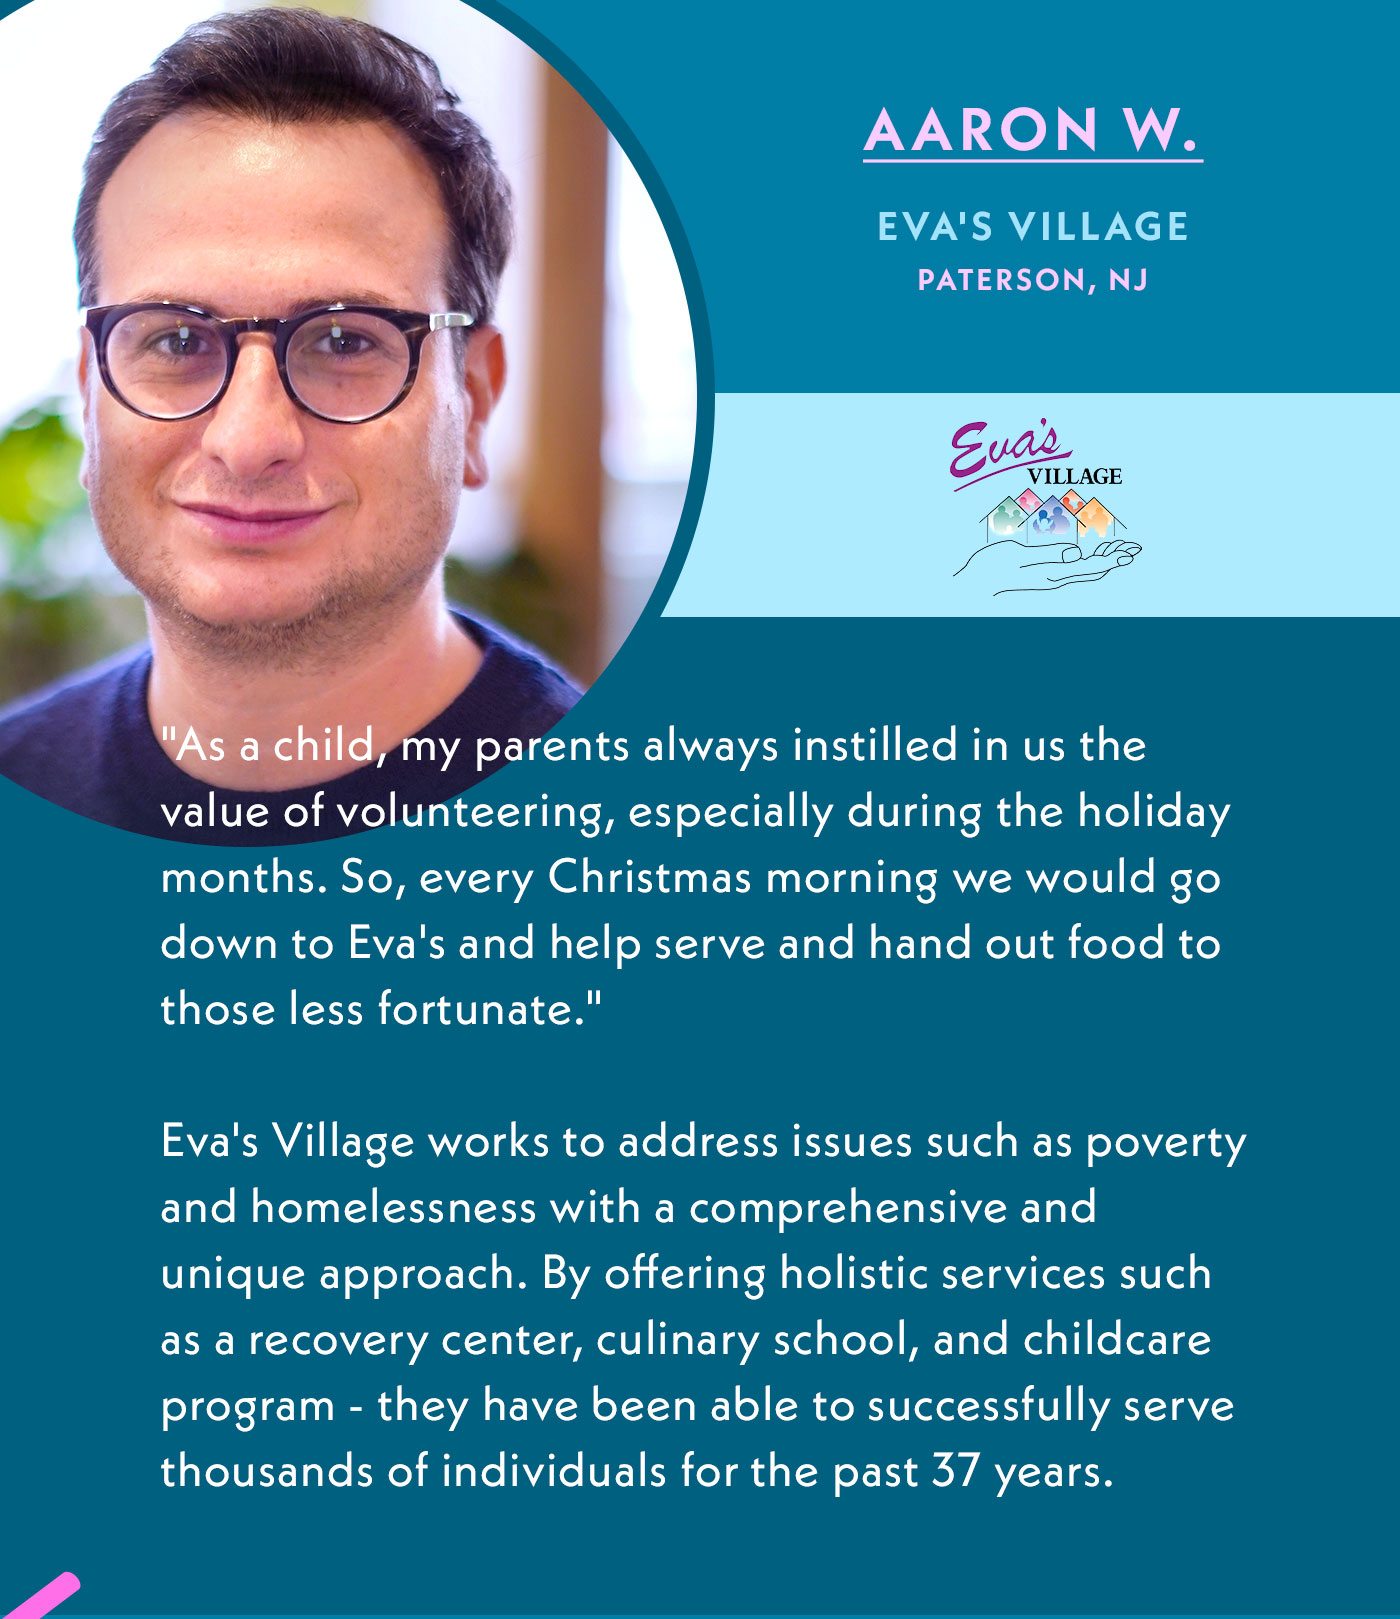 Aaron W. | Eva's Village | Paterson, NJ | As a child, my parents always instilled in us the value of volunteering, especially during the holiday months. So, every Christmas morning we would go down to Eva's and help serve and hand out food to those less fortunate. | Eva's Village works to address issues such as poverty and homelessness with a comprehensive and unique approach. By offering holistic services such as a recovery center, culinary school, and childcare program - they have been able to successfully serve thousands of individuals for the past 37 years.